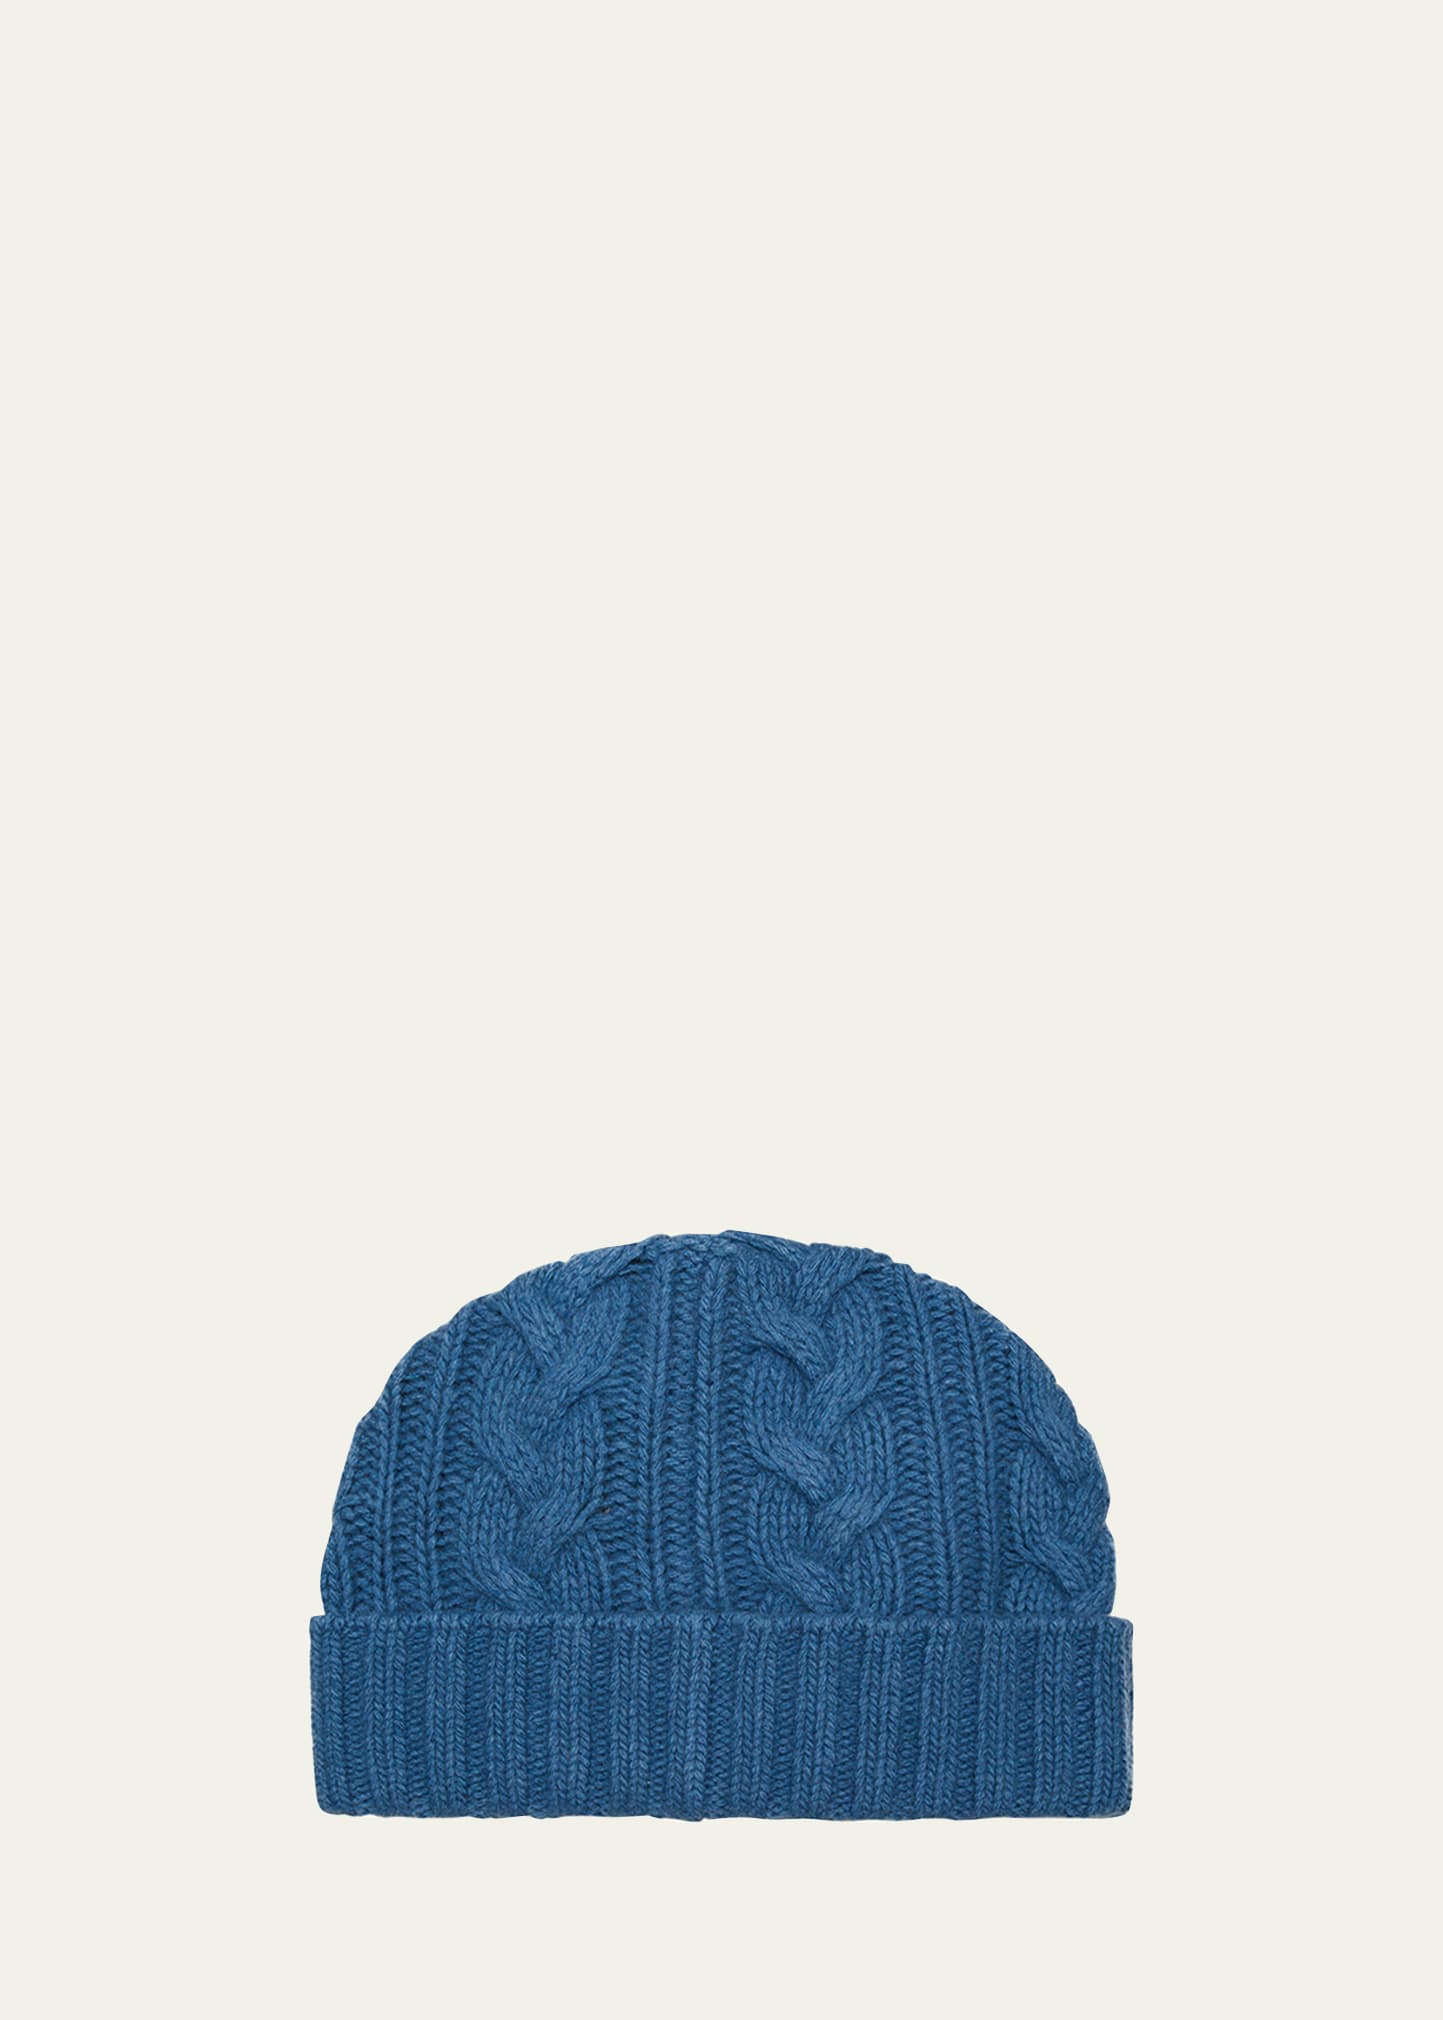 Portolano Men's Cable-knit Cuffed Cashmere Beanie Hat In Palace Blue